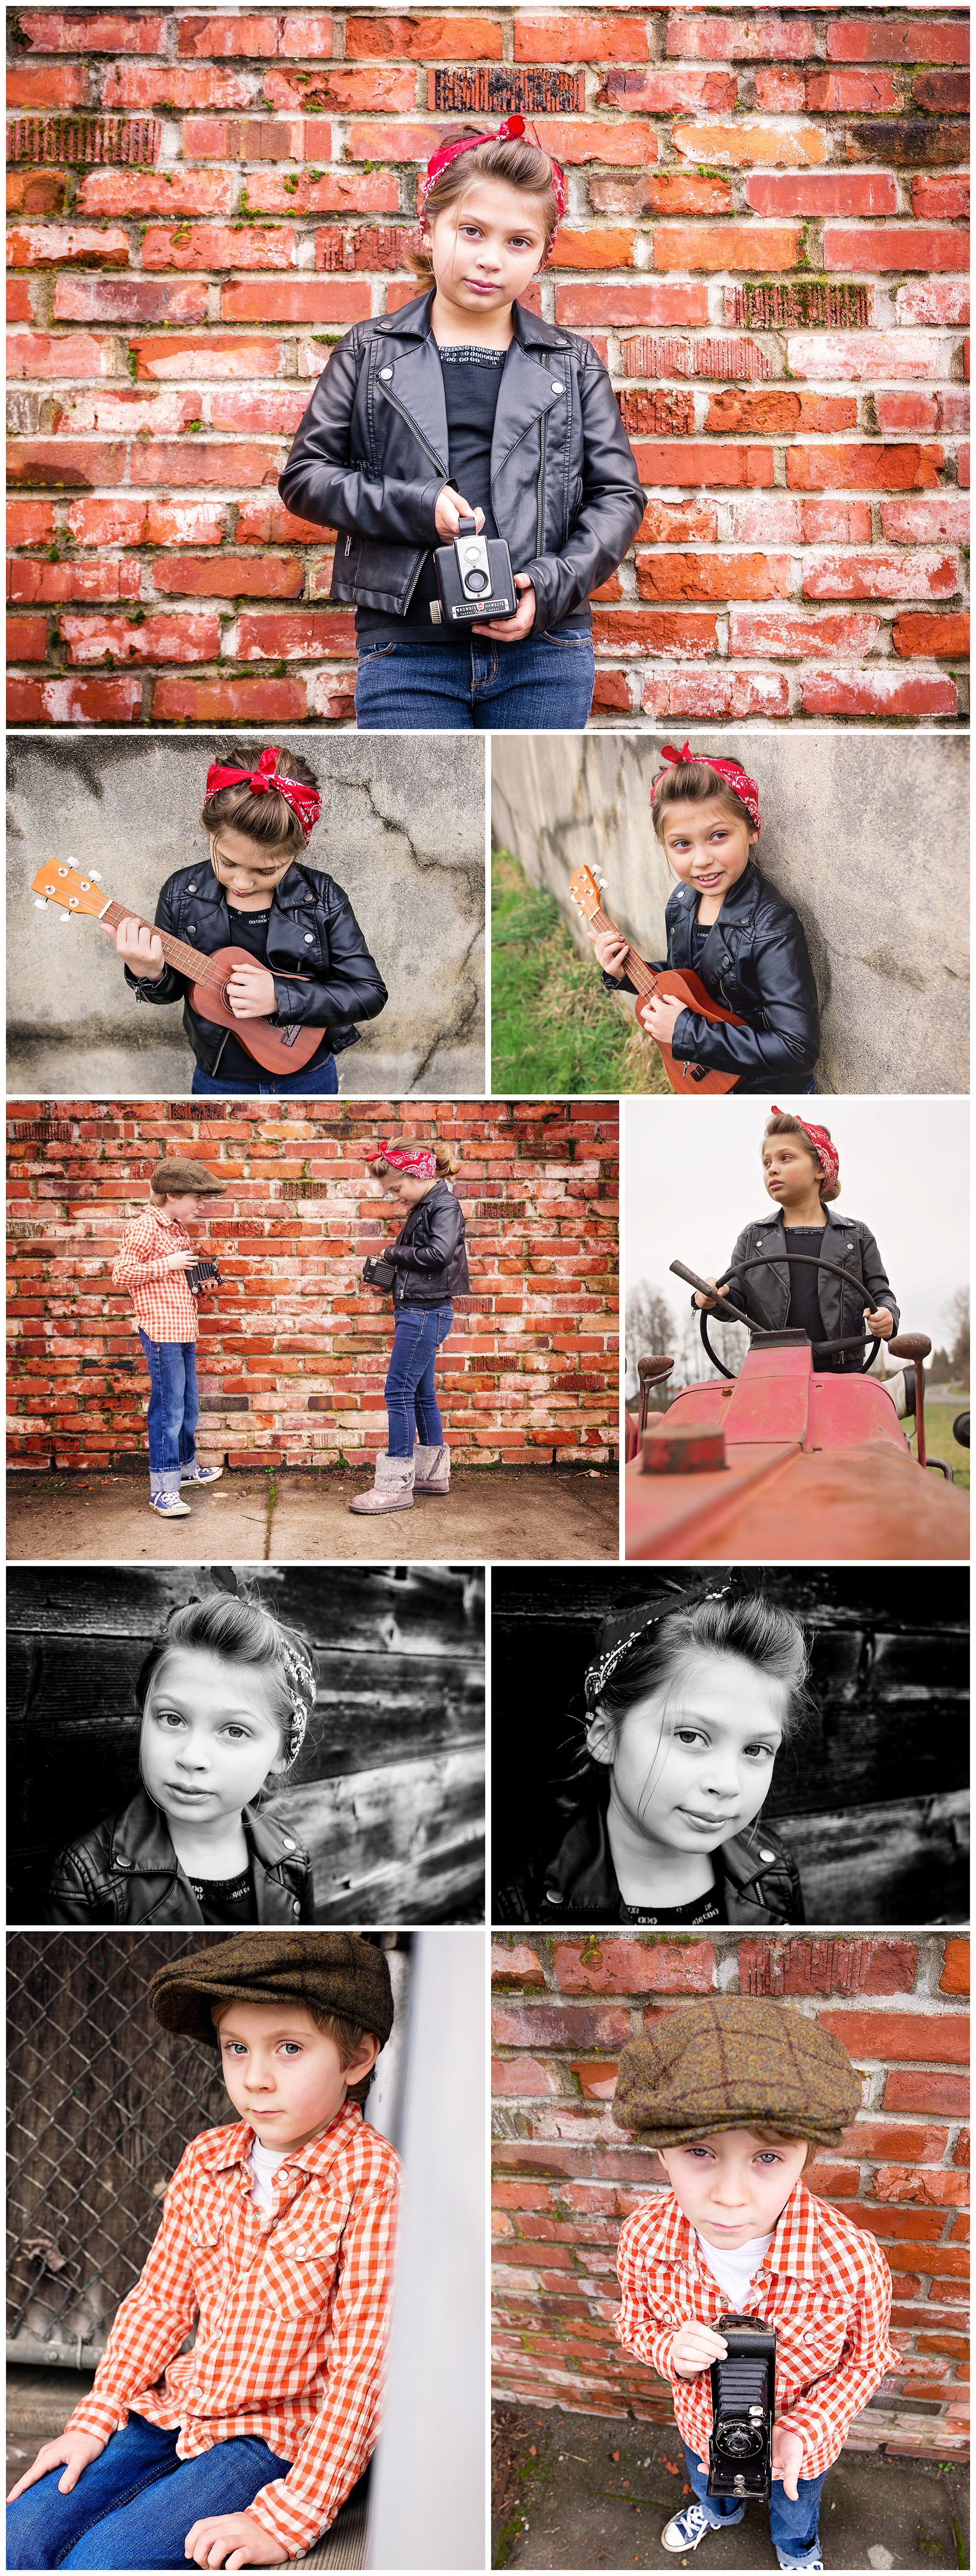 Rockabilly Kids {by Rusted Van Photography}